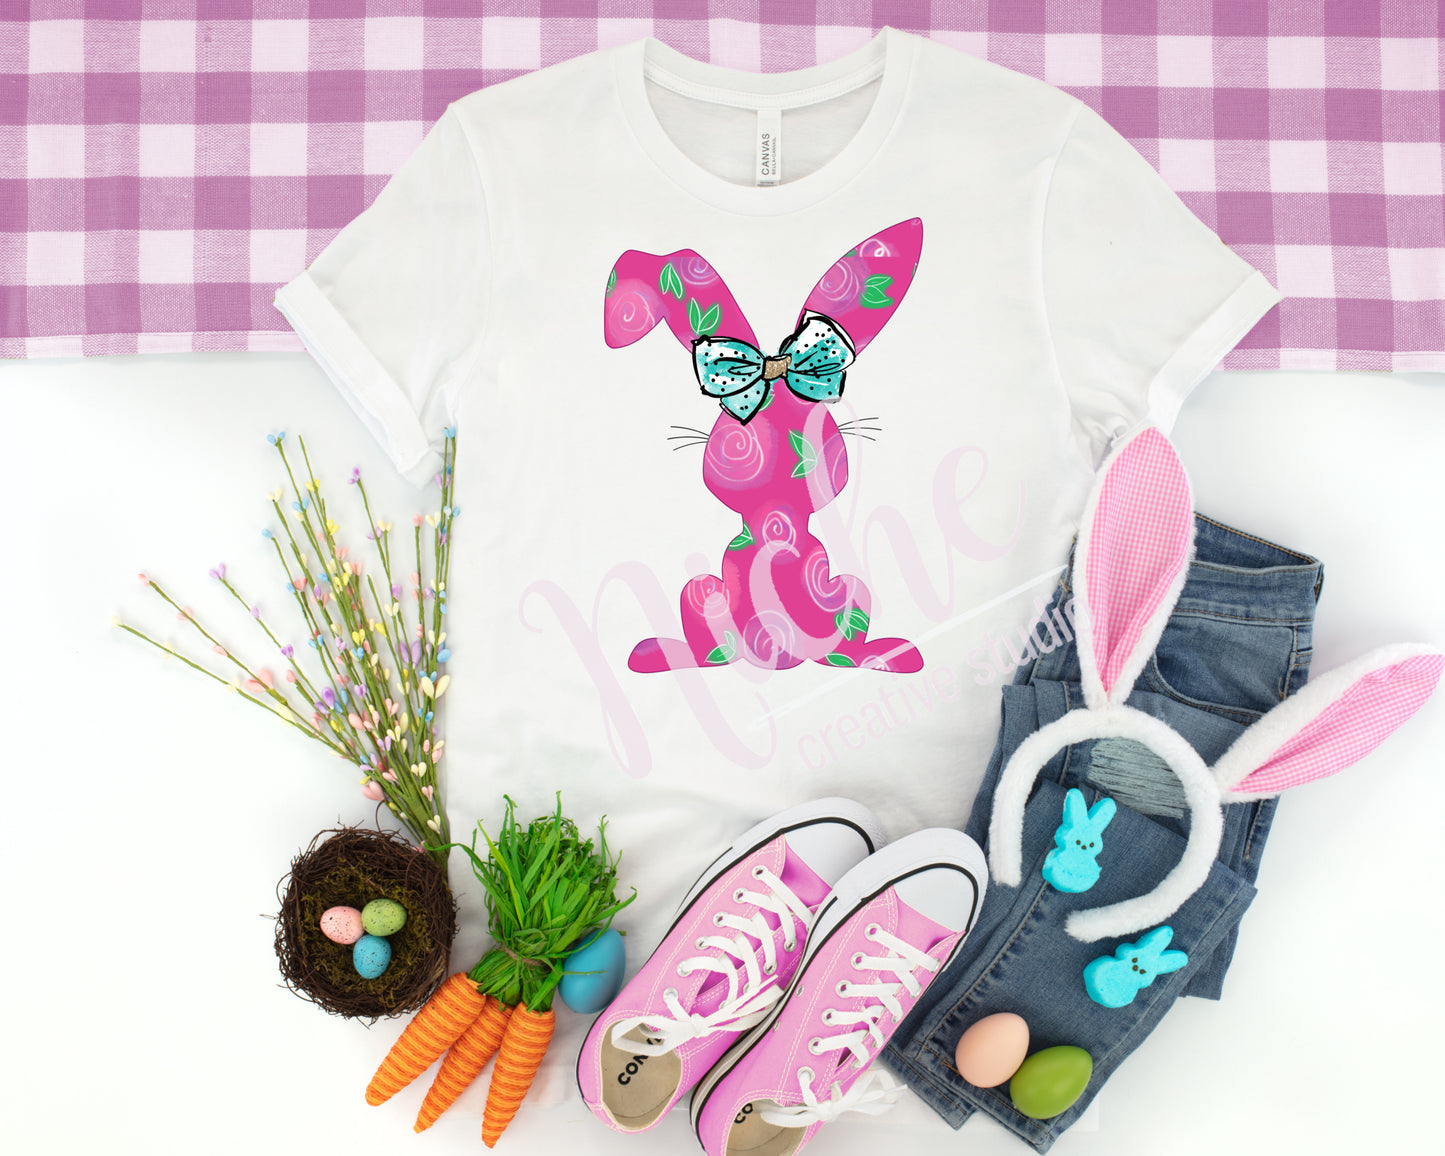 -EAS2530 Pink Floral Bunny Decal